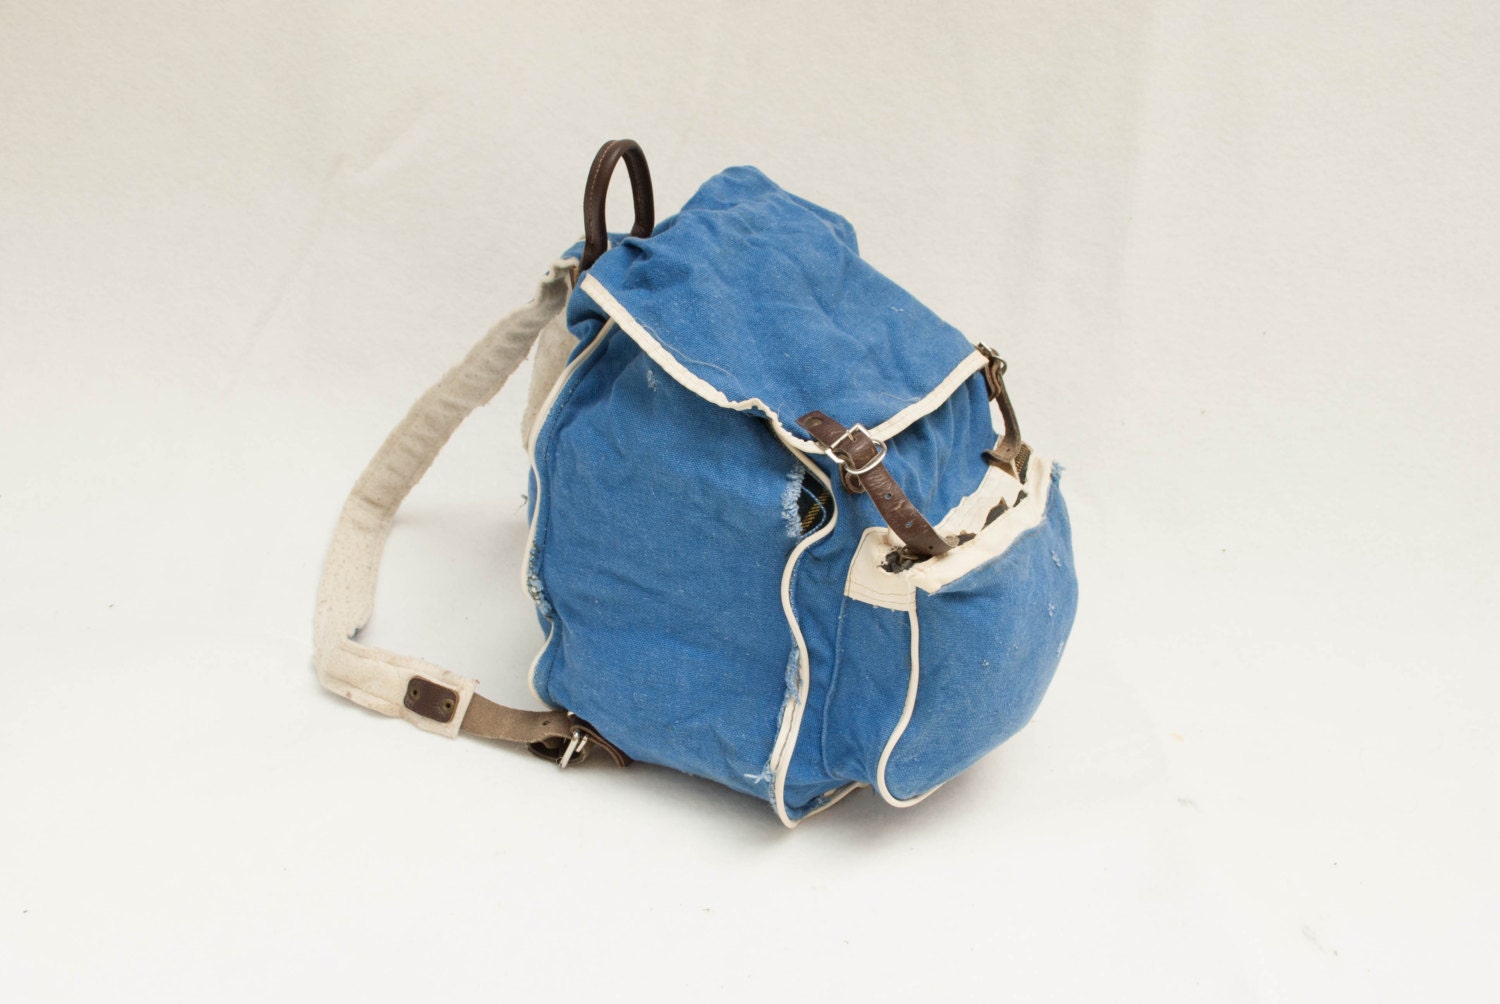 Vintage cotton backpack rucksack blue white small size - PastPerfectContinues